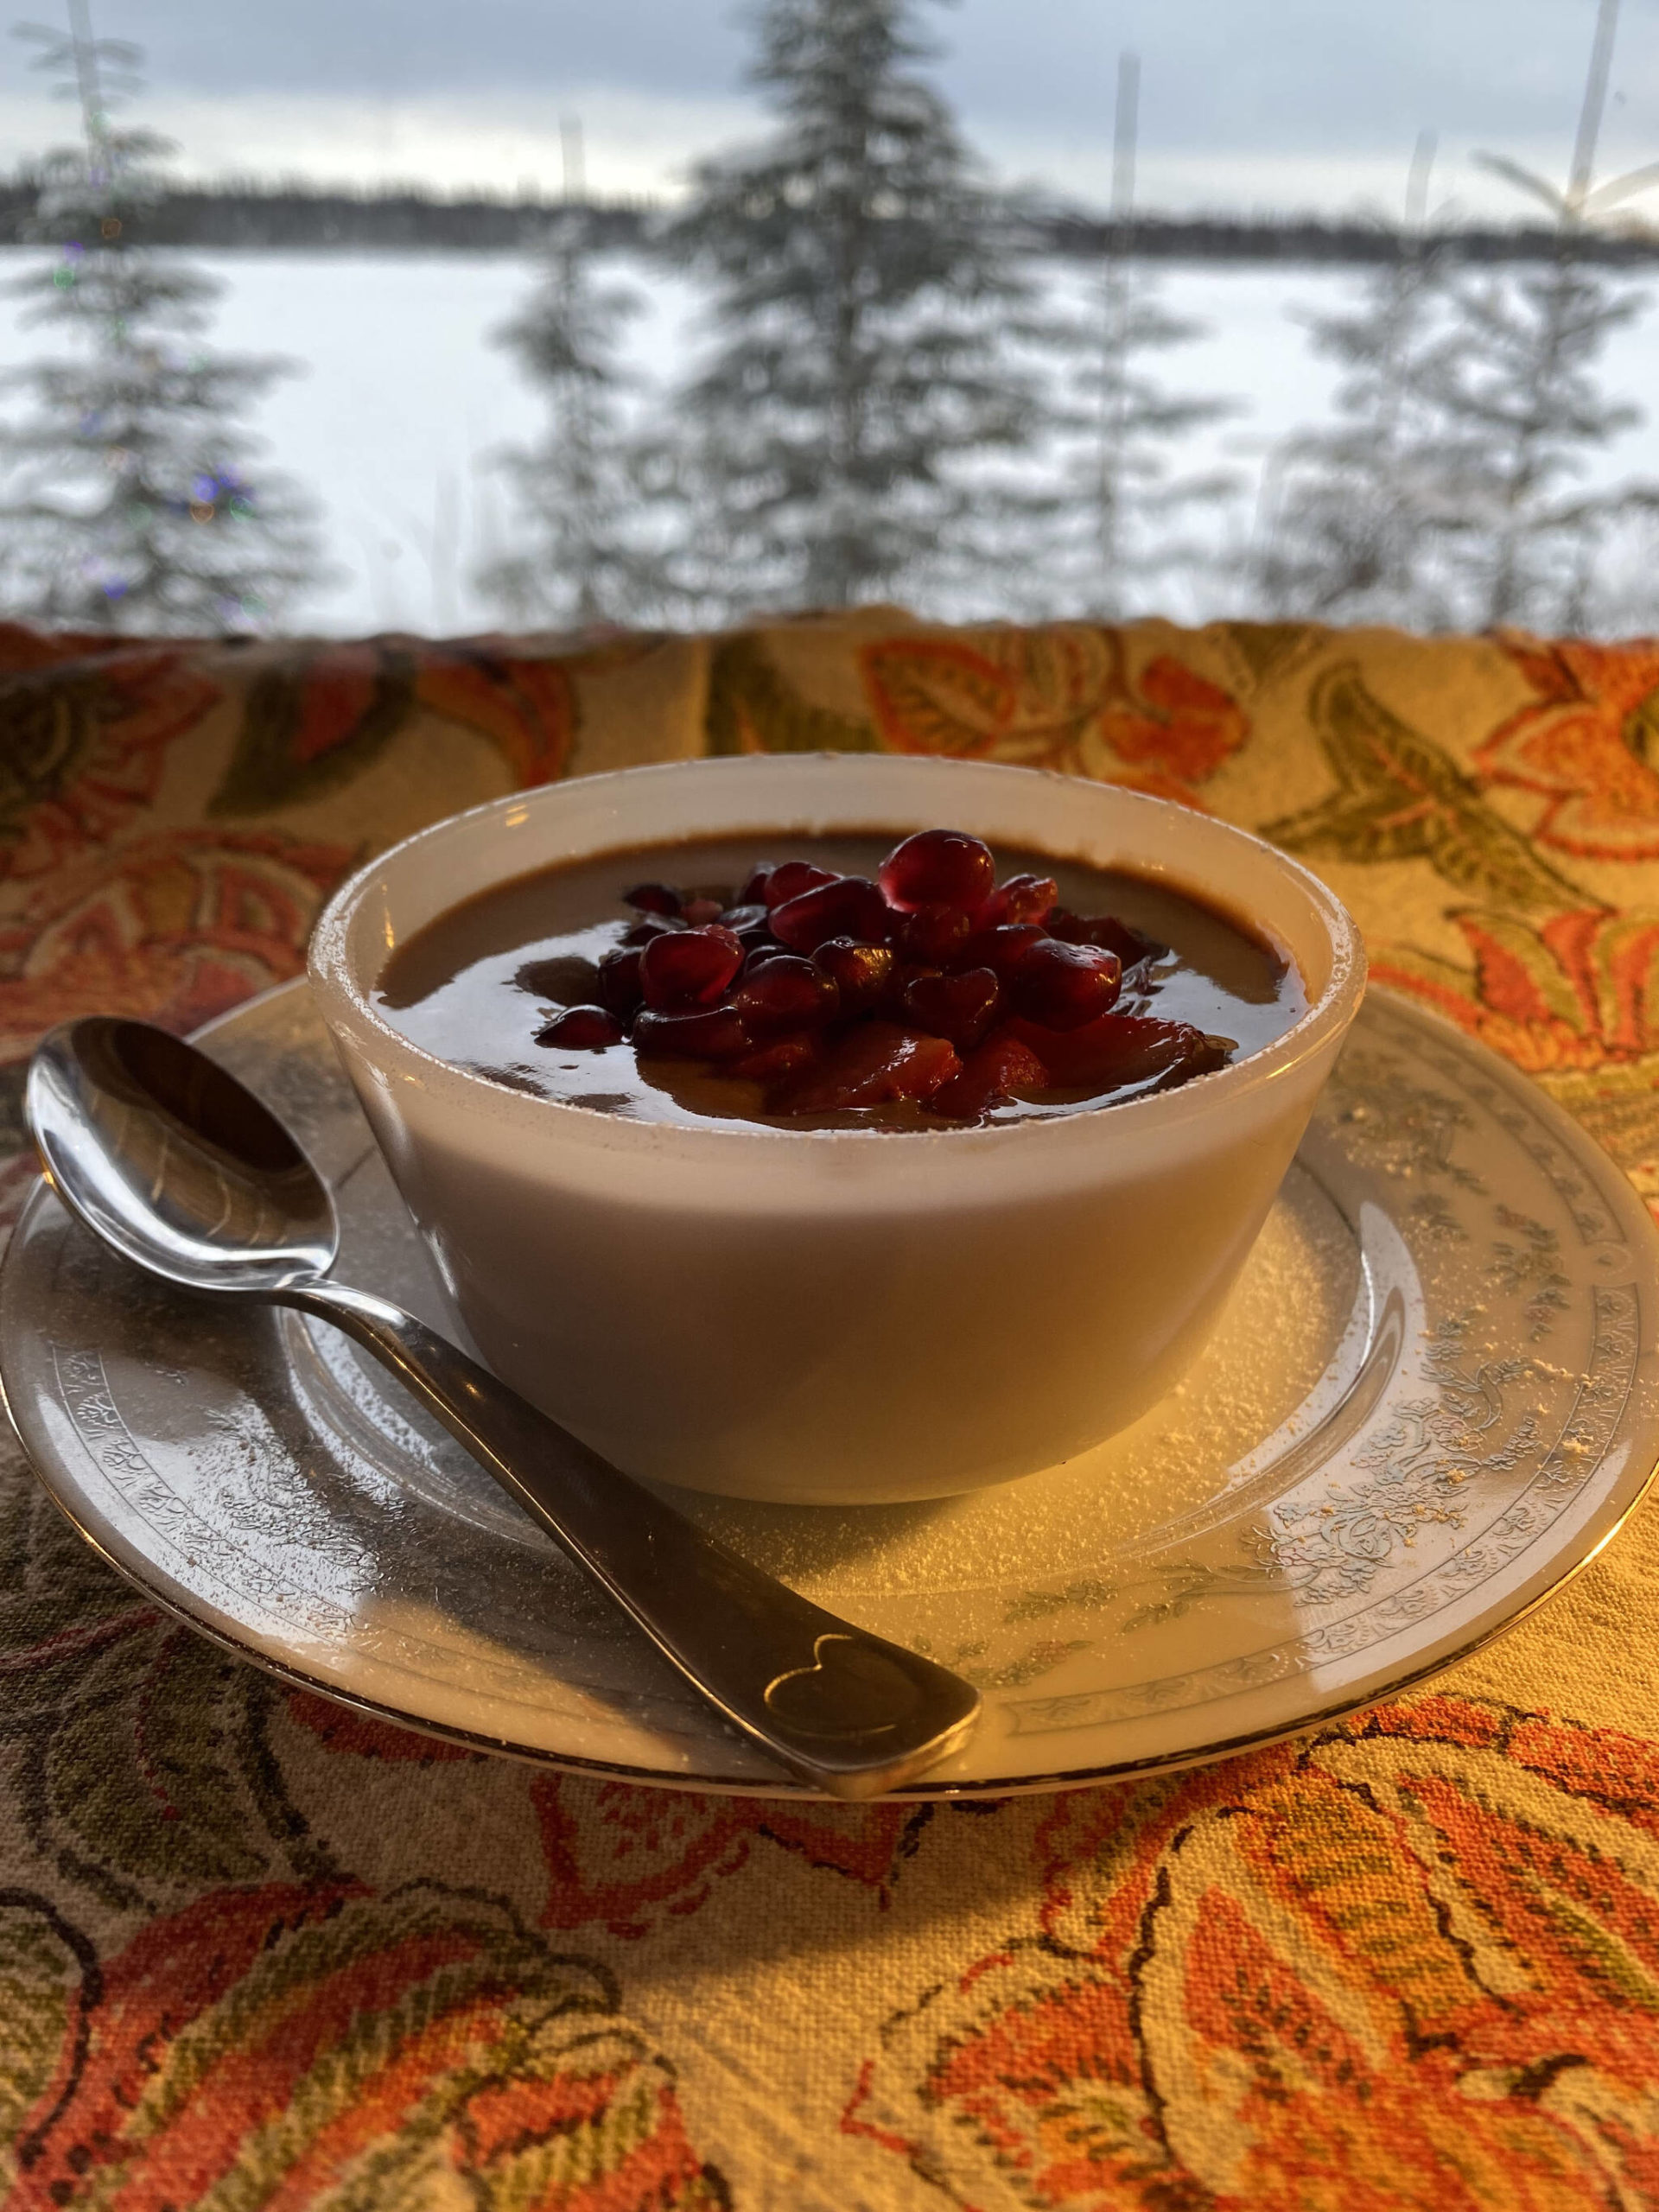 Put leftover ingredients to good use with this rich chocolate pudding. (Photo by Tressa Dale/Peninsula Clarion)